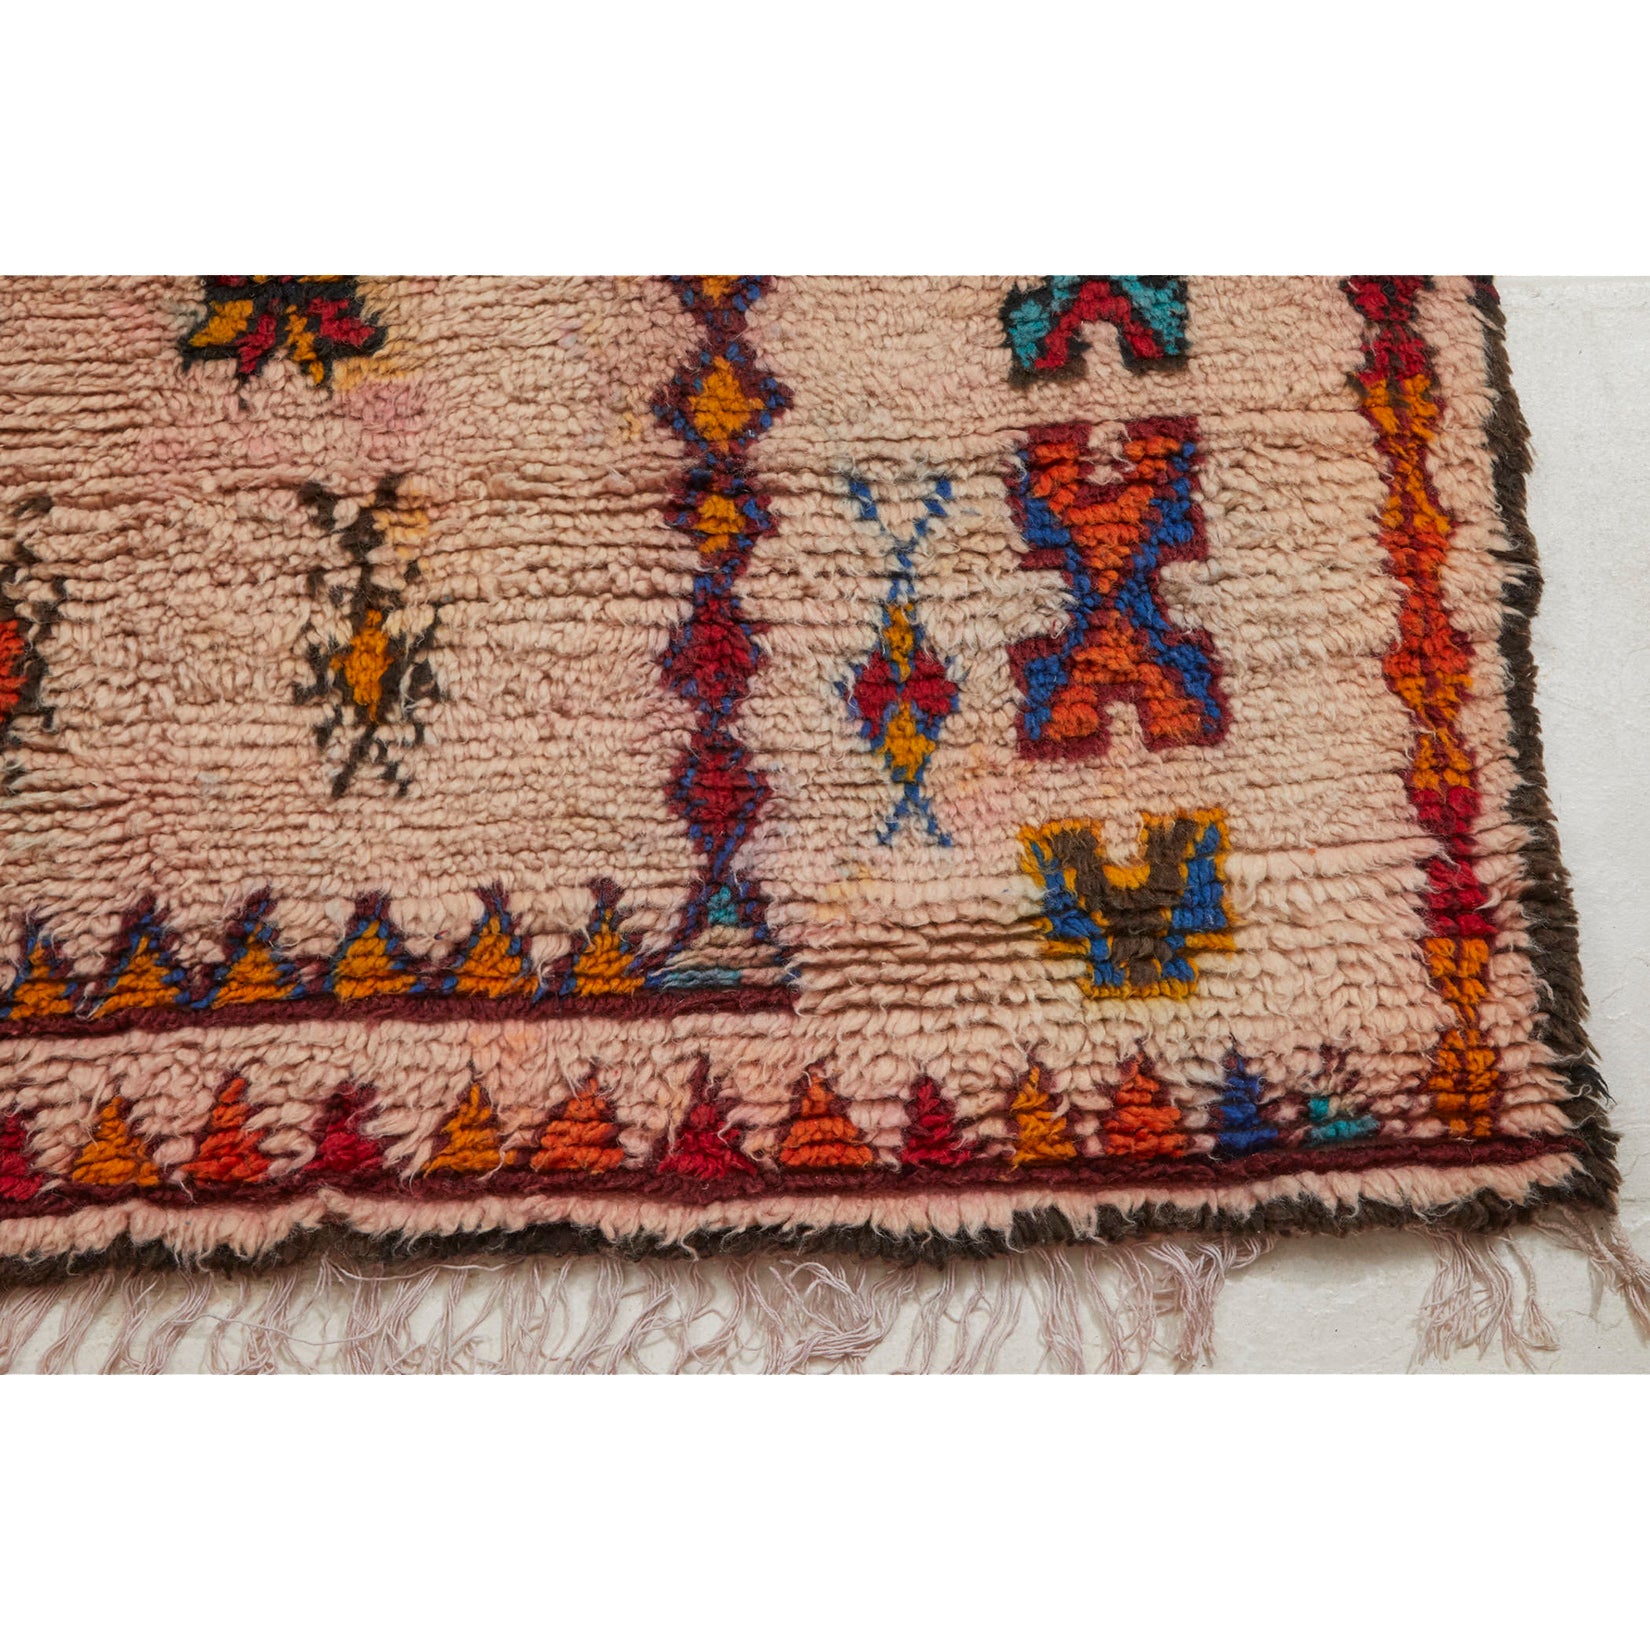 Handknotted Azilal style vintage Moroccan area rug - Kantara | Moroccan Rugs